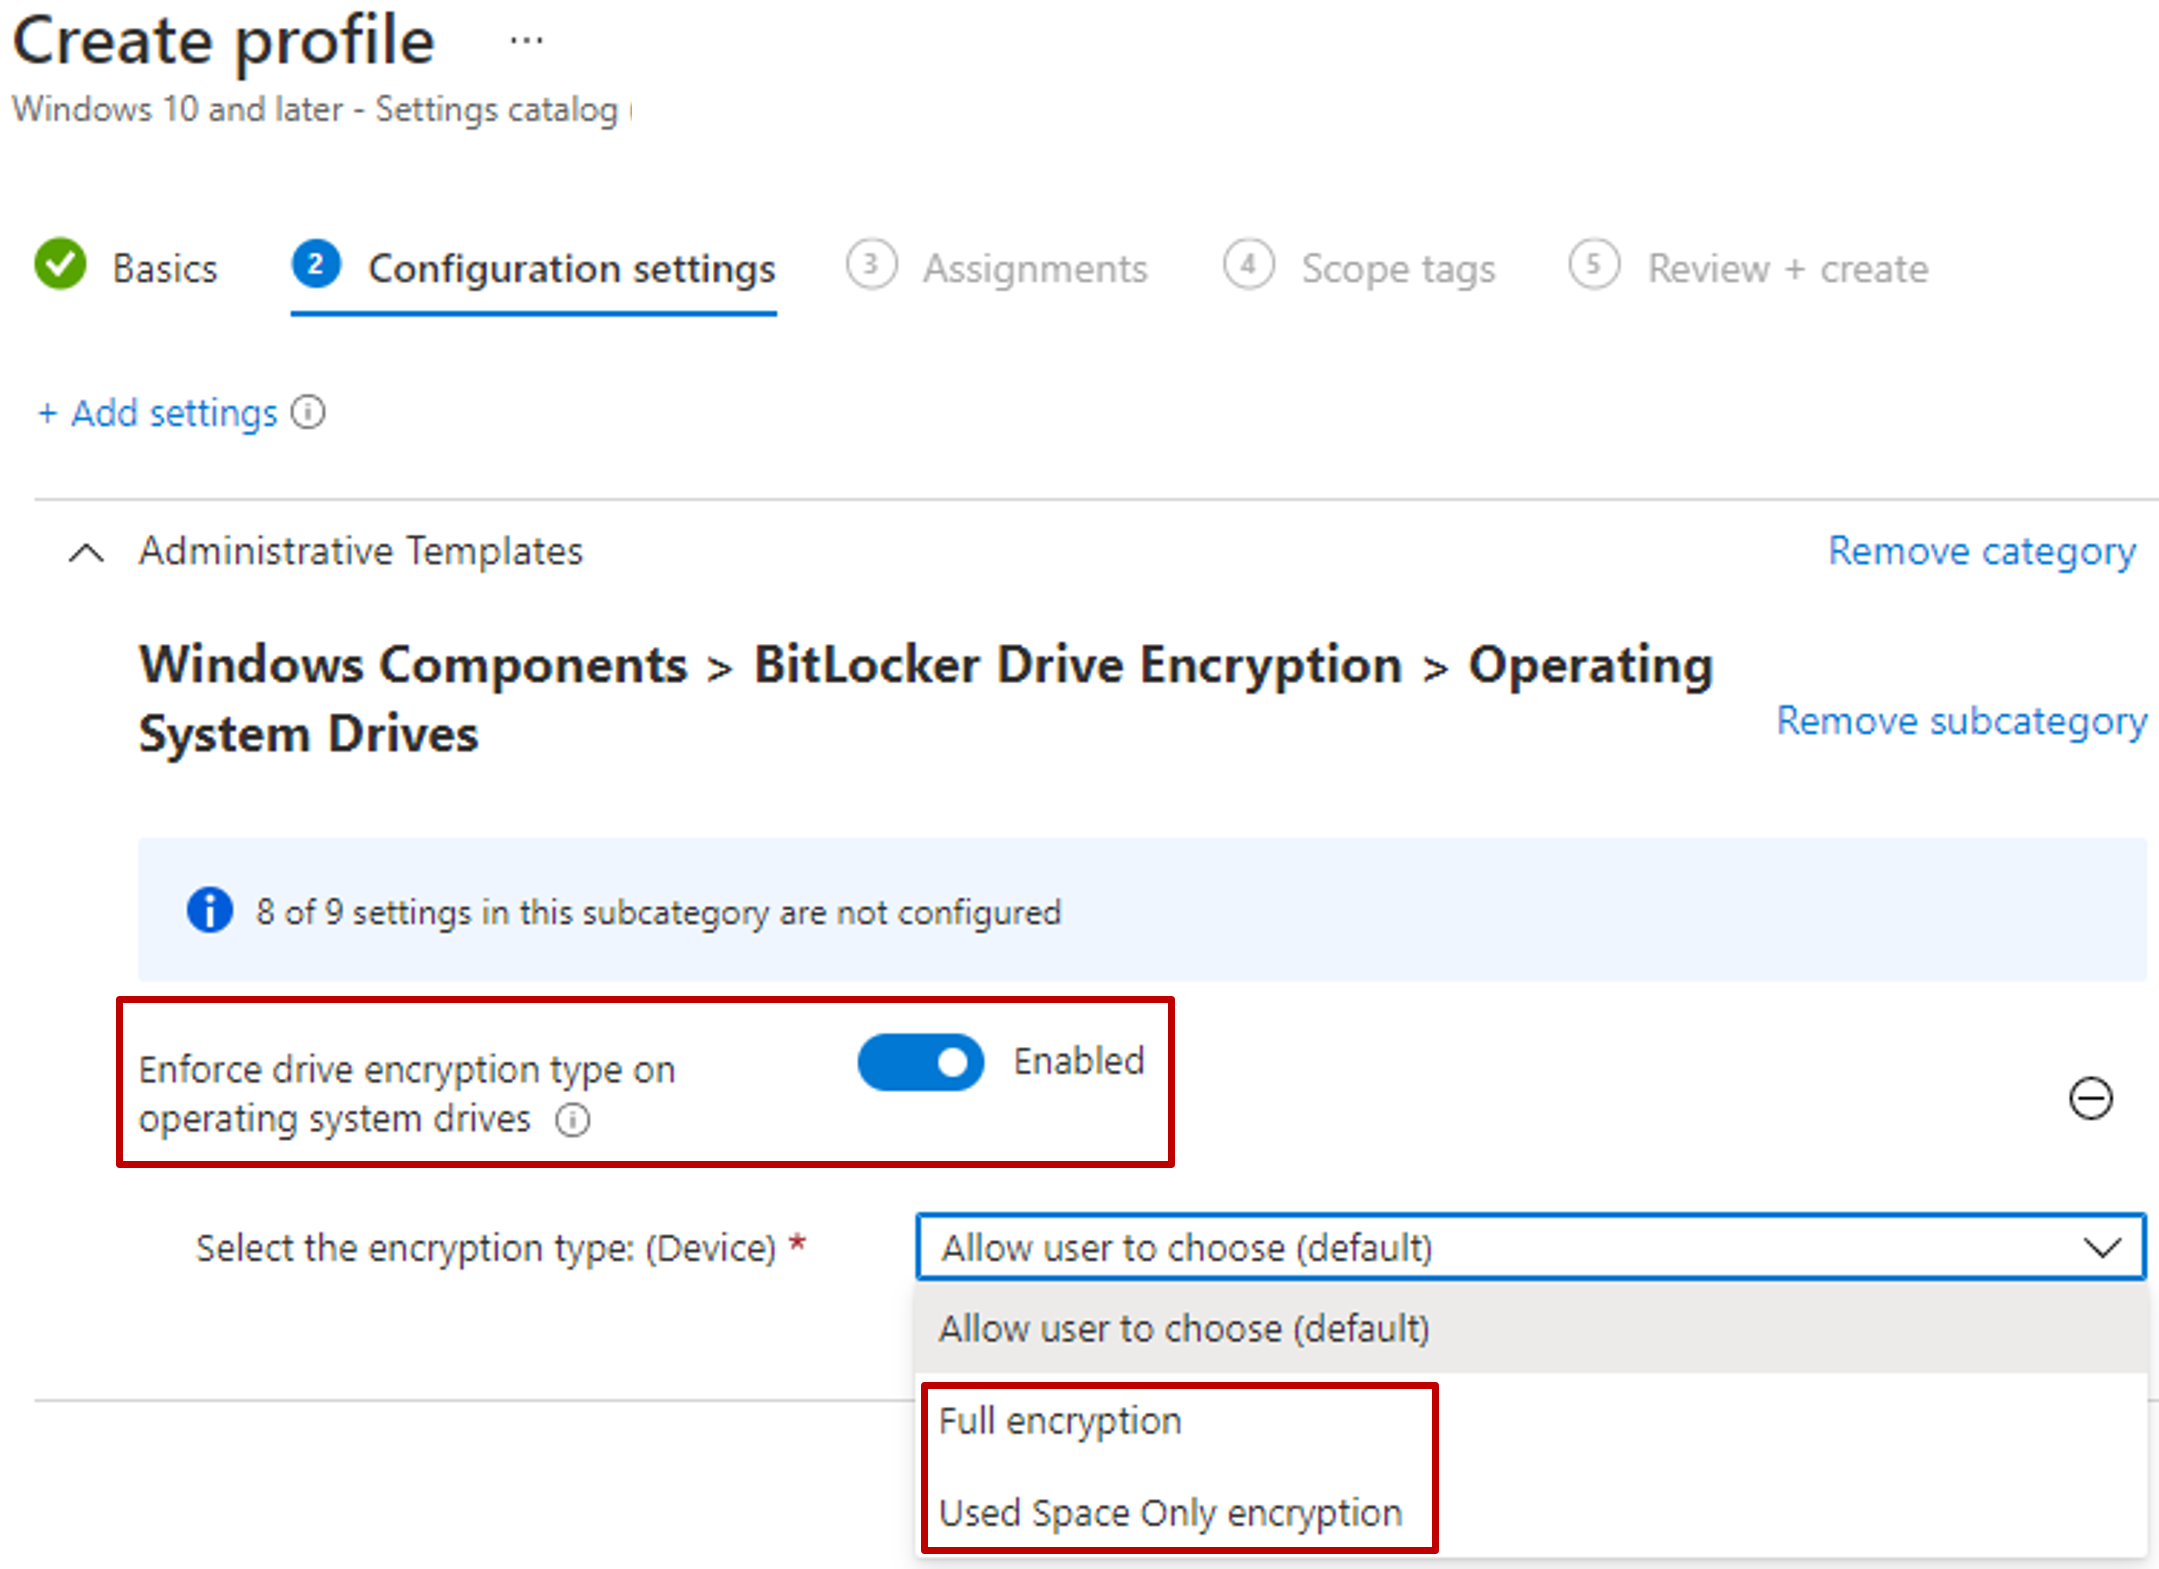 Screenshot of Intune settings catalog displaying Enforce drive encryption type on operating system drives setting and drop-down list to select from full or used space only encryption types.